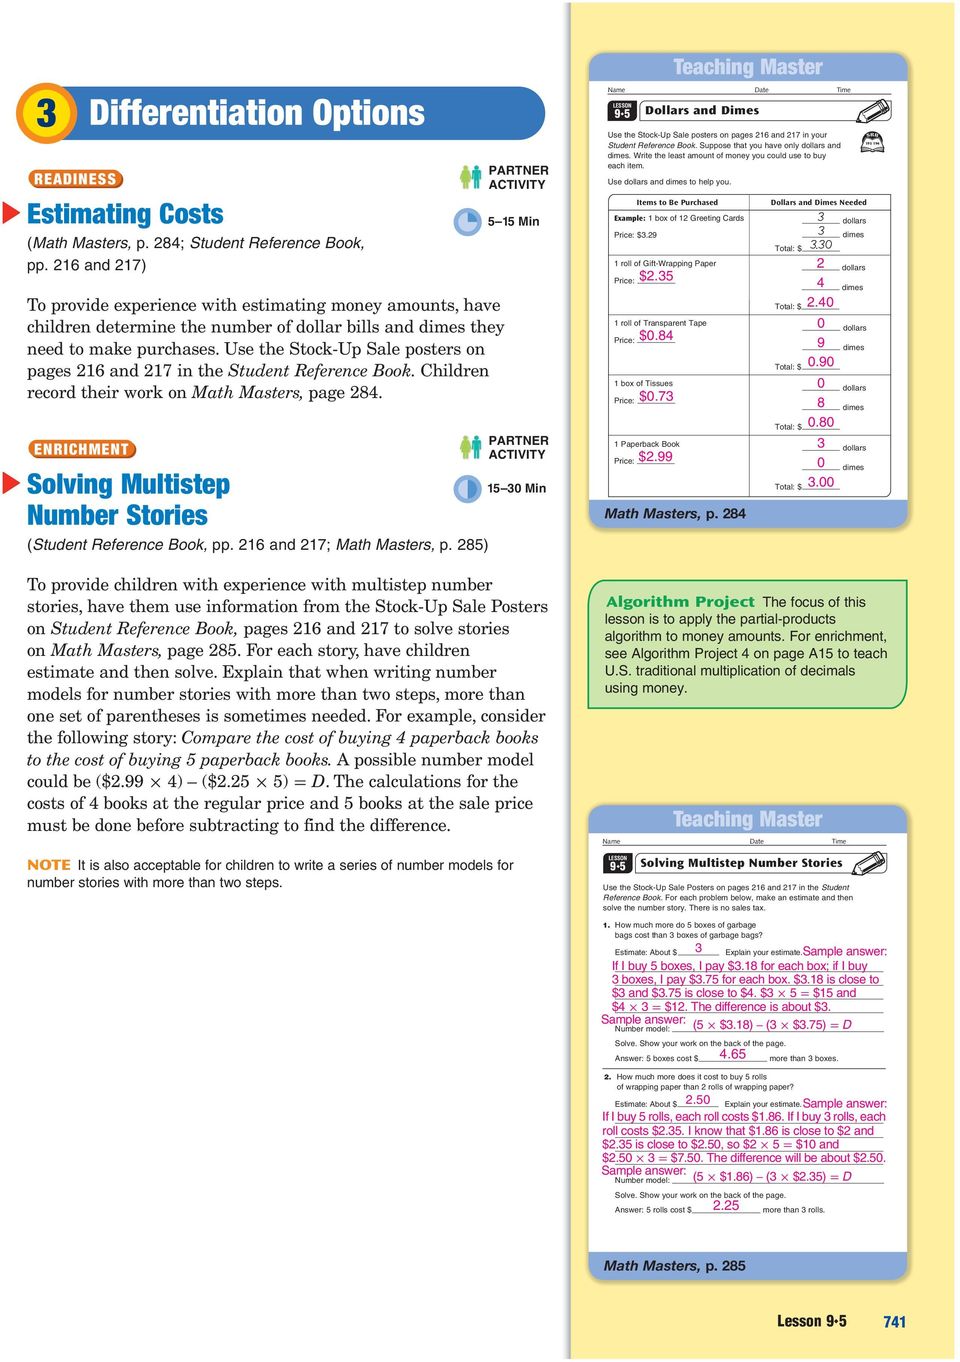 Use the Stock-Up Sale posters on pages 216 and 217 in the Student Reference Book. Children record their work on Math Masters, page 28.